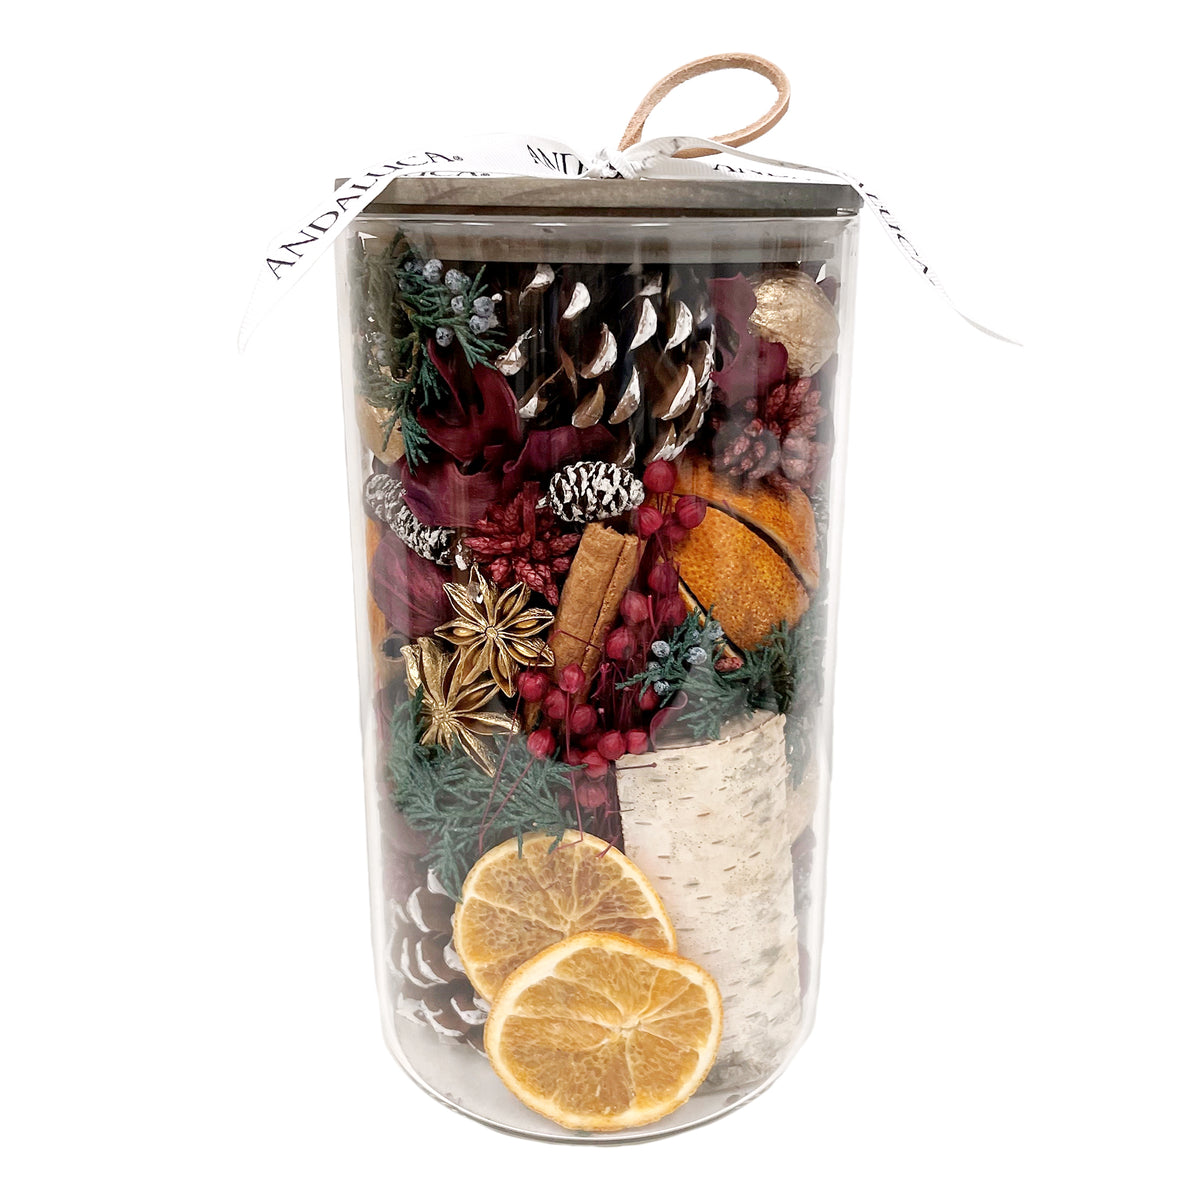 Stove Top Potpourri, AKA Holiday in a Jar — Always & Whatever